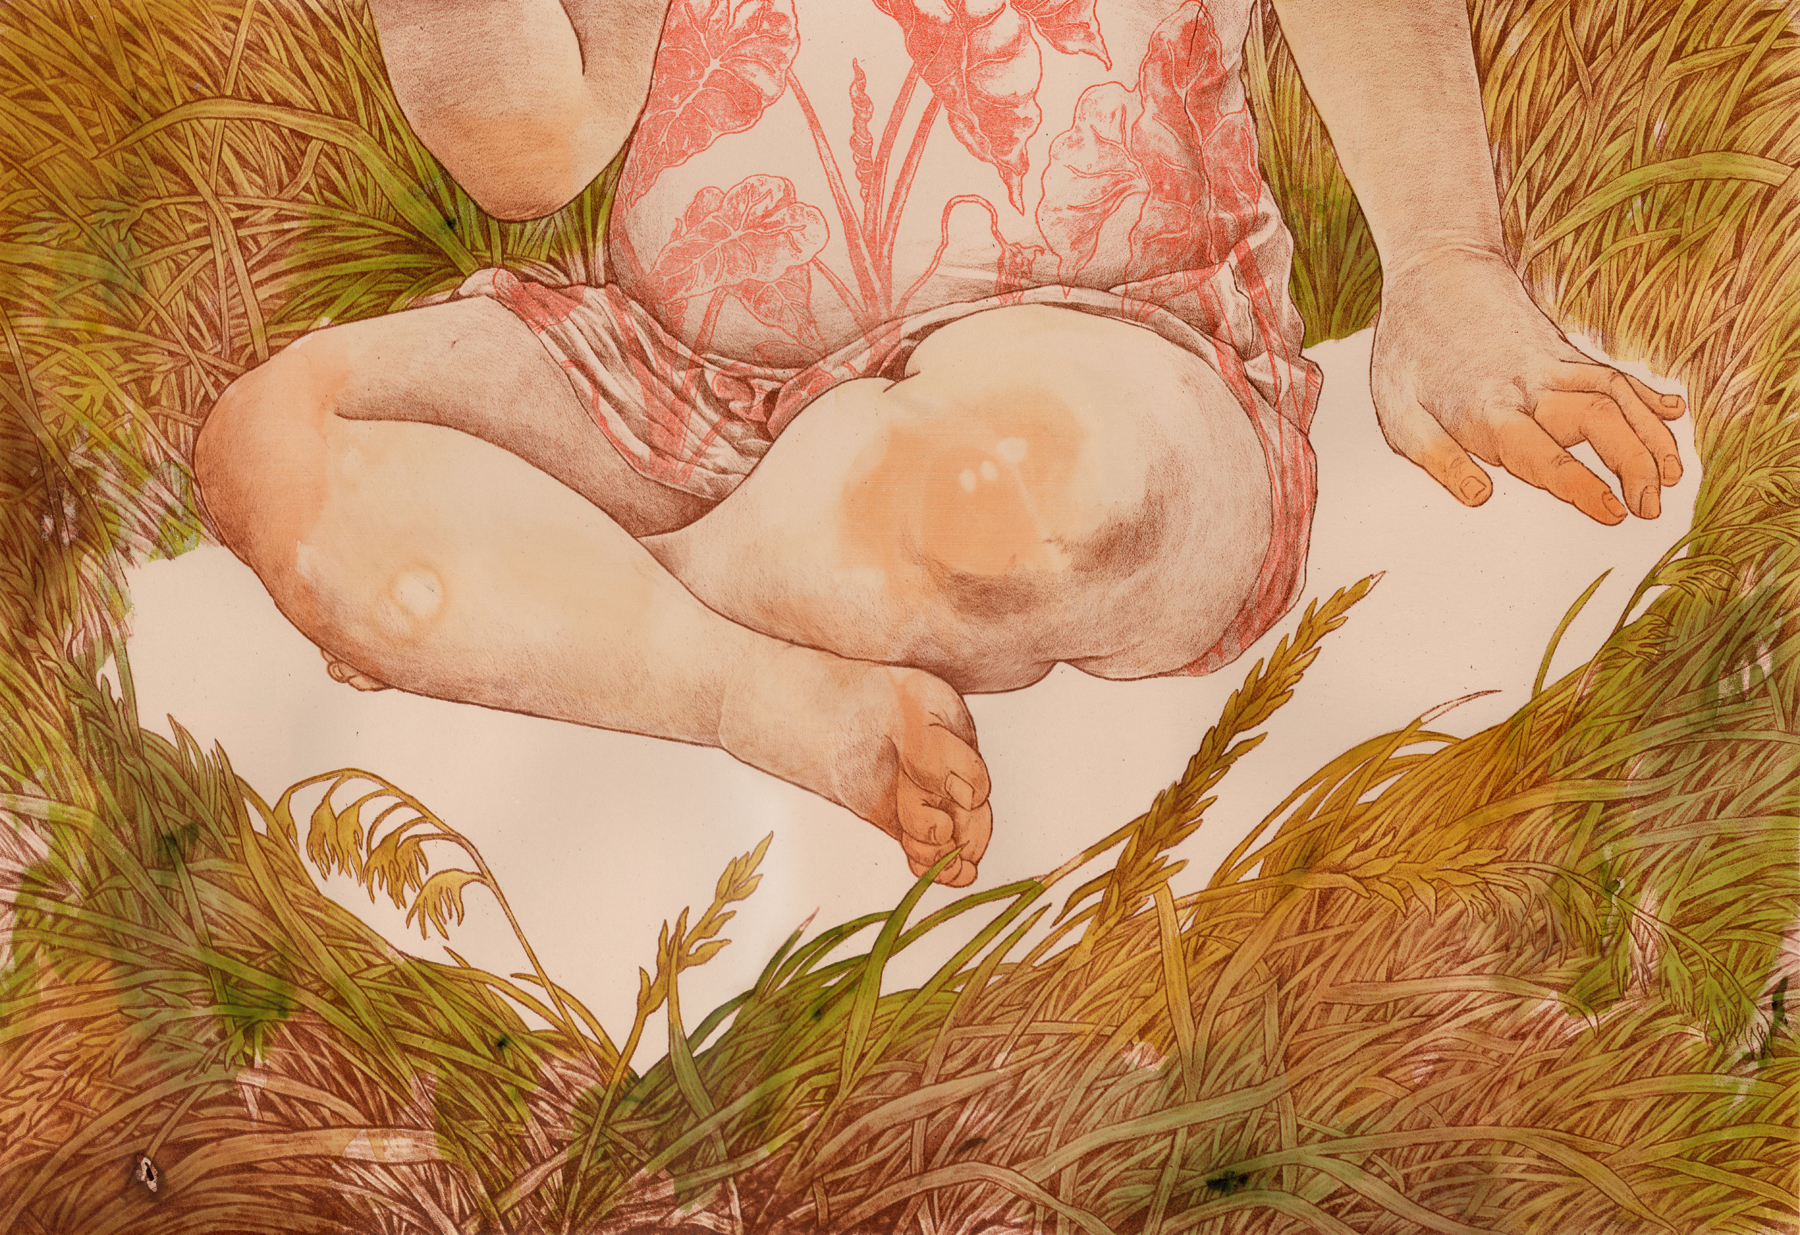 A child with light skin wearing a dress with pink plants is pictured from the chest down and sits cross-legged in a bare spot of ground surrounded by greenish-brown grasses